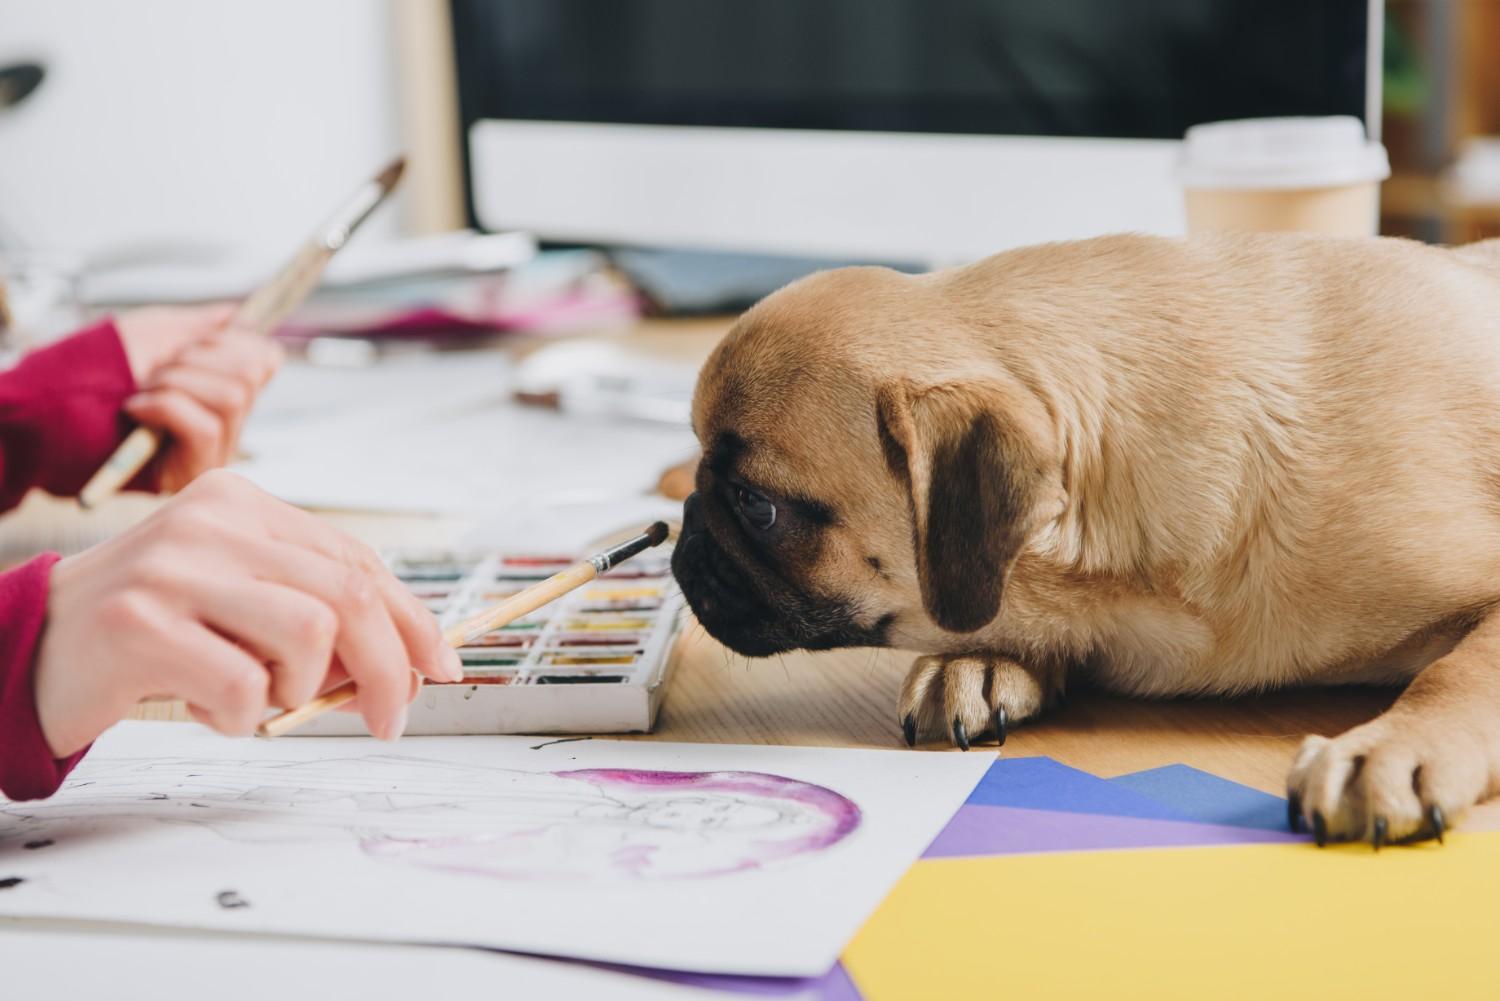 8 Art Studios Where You Can Paint With Your Pet